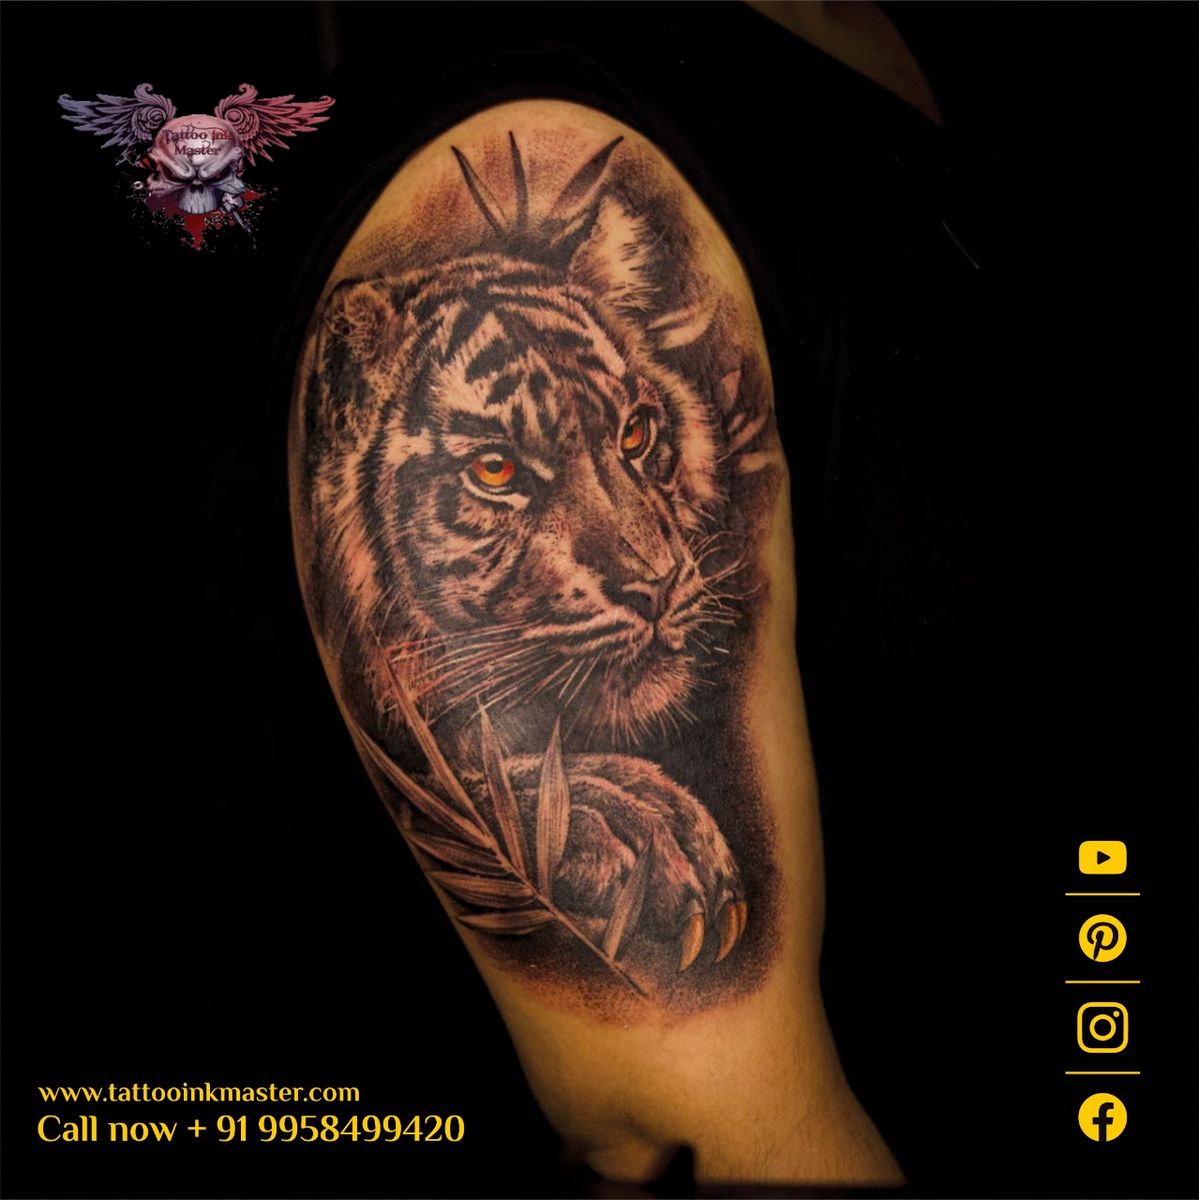 You are currently viewing Powerful Tiger Tattoo in Big Size